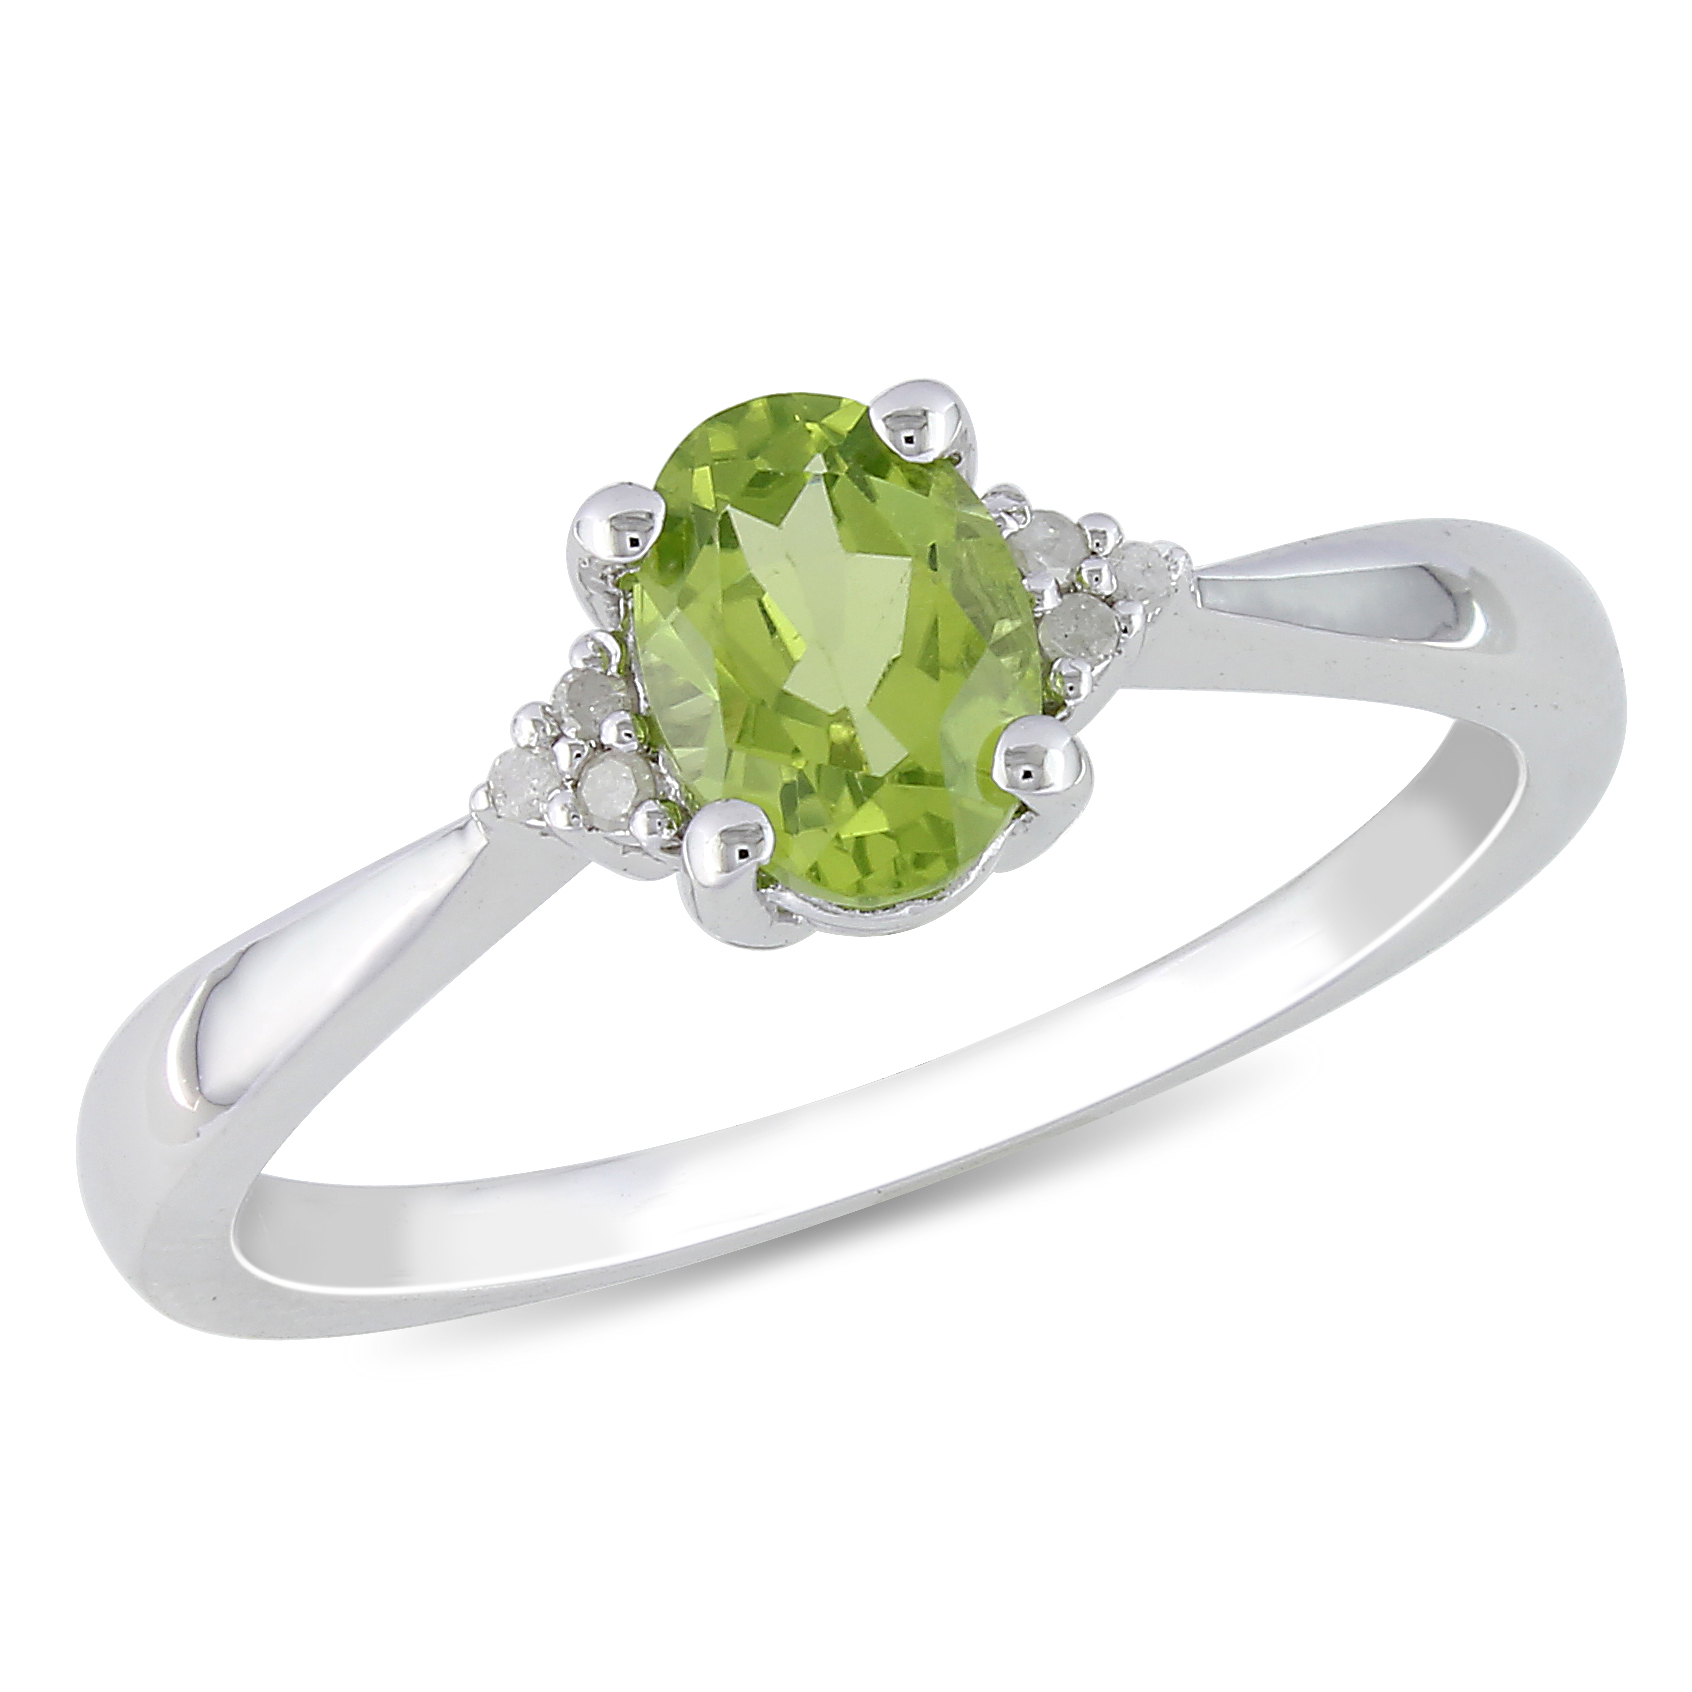 0.03 Carat T.W. Diamond and 4/5 Carat T.G.W. Peridot Fashion Ring in Sterling Silver I3